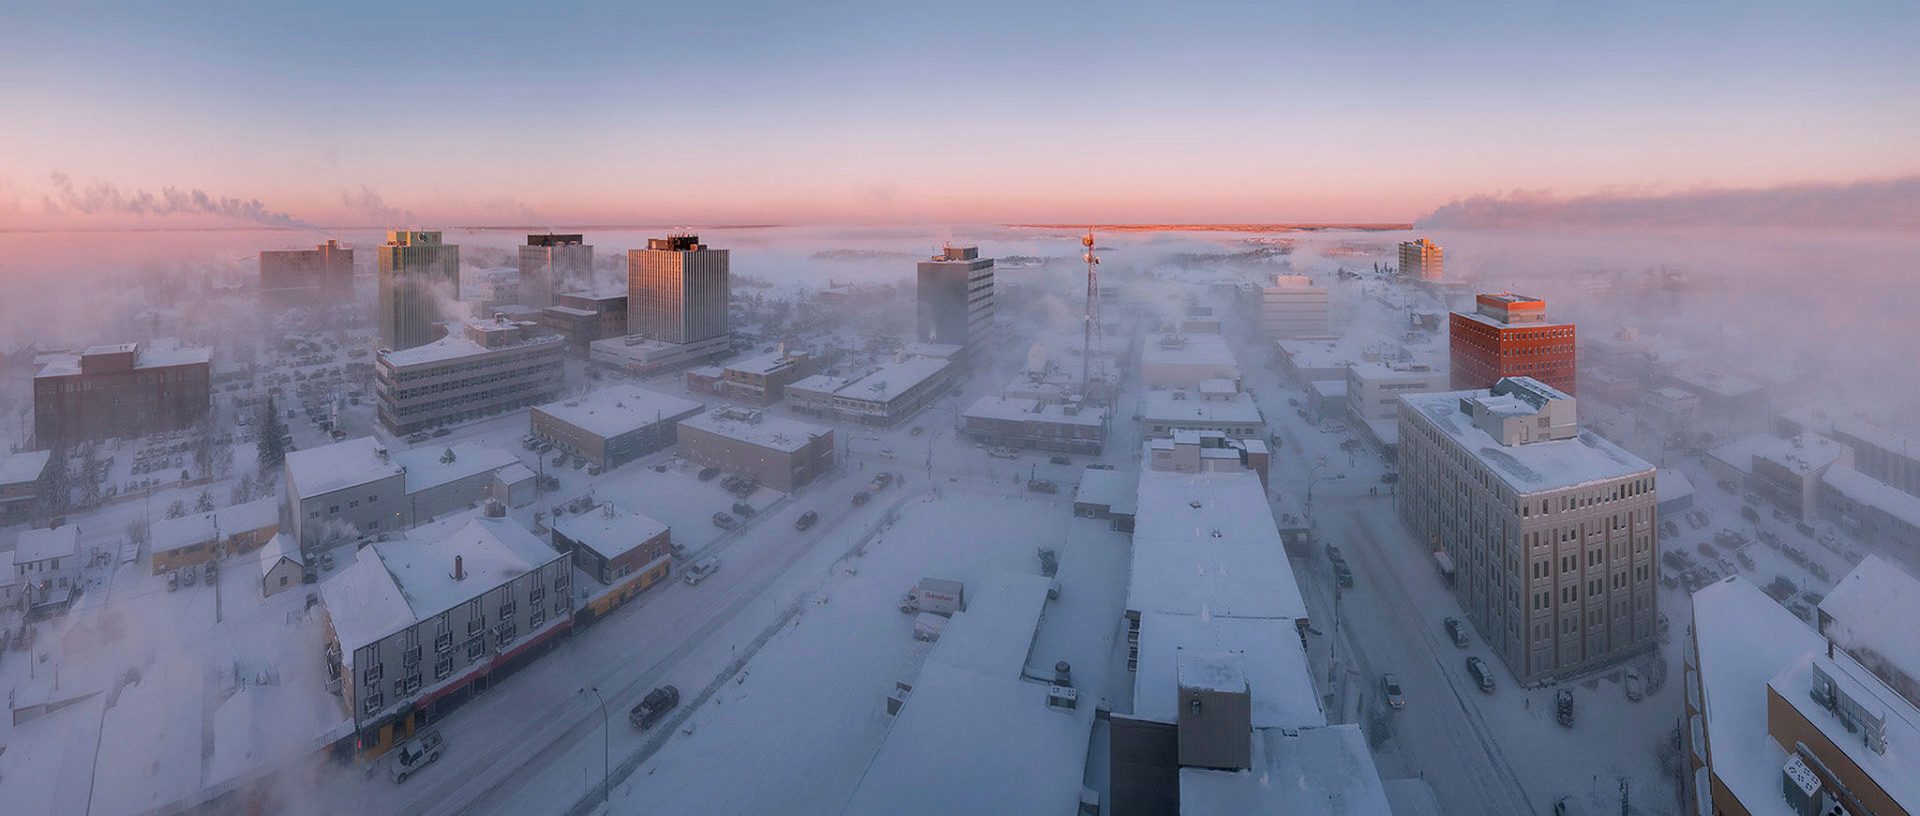 Yellowknife, Northwest Territories. Photograph by Gawain, courtest of Flickr